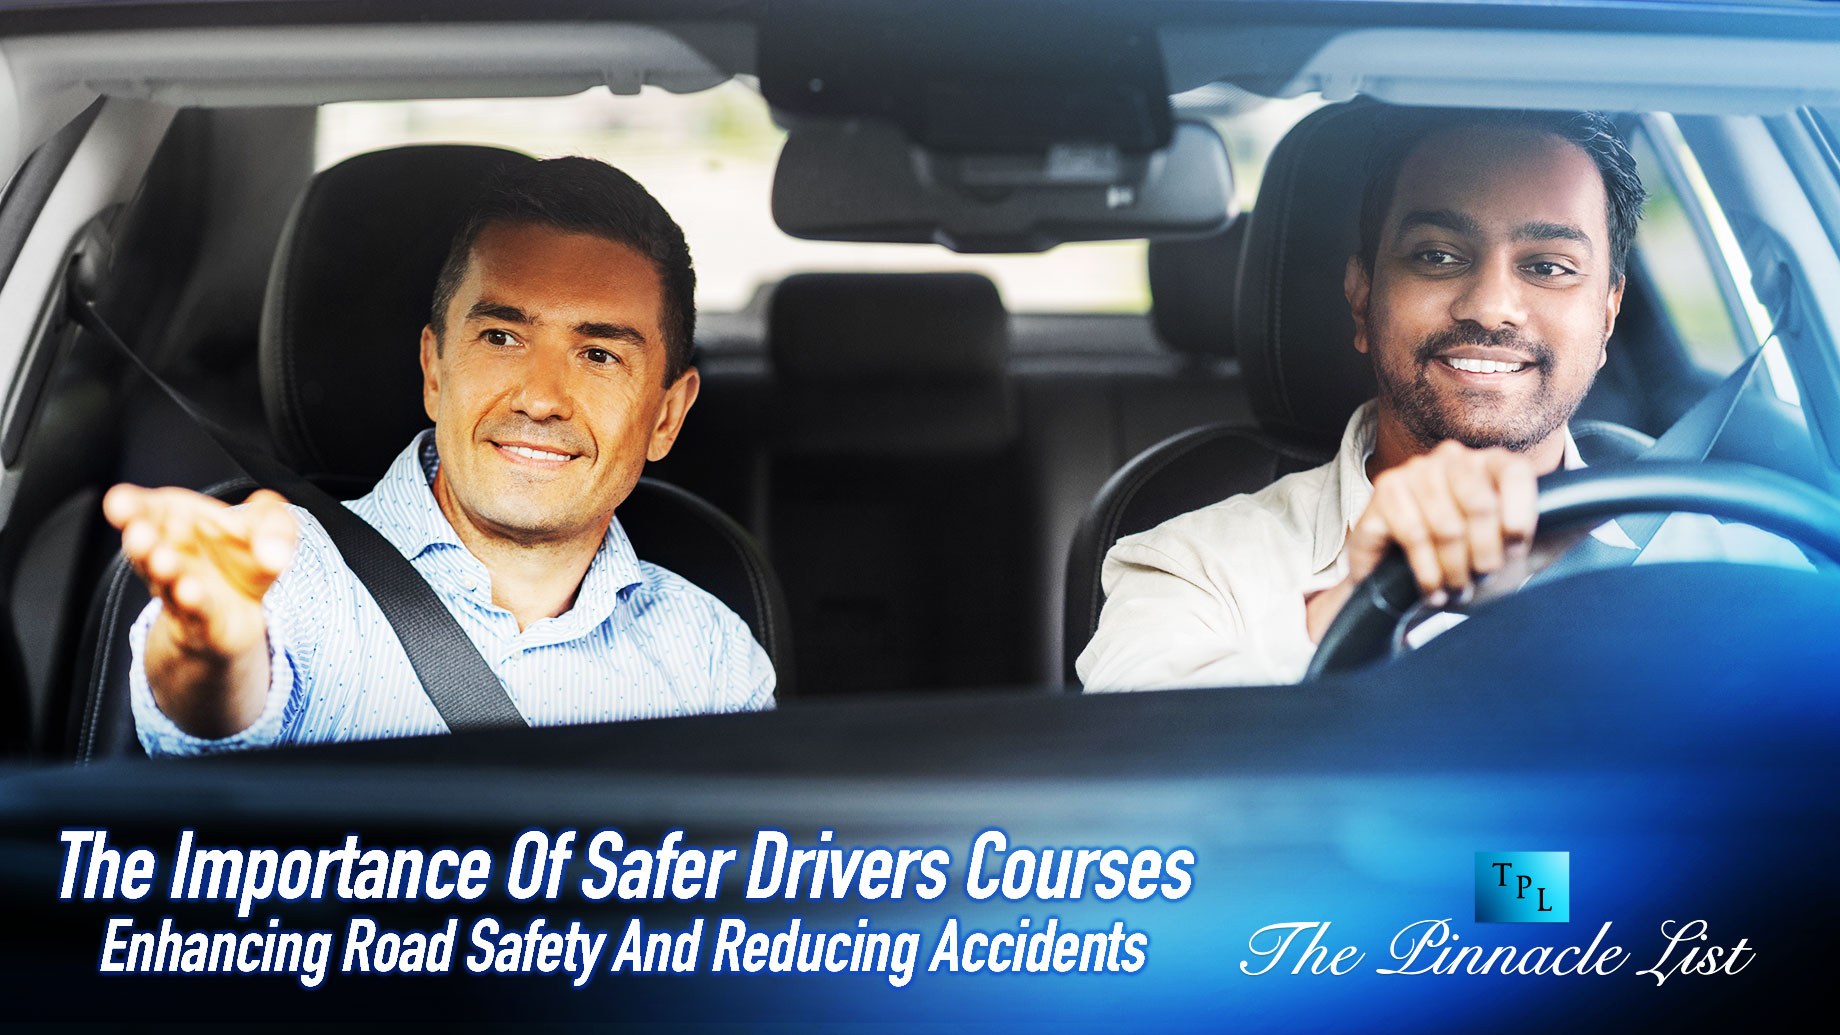 The Importance Of Safer Drivers Courses: Enhancing Road Safety And Reducing Accidents